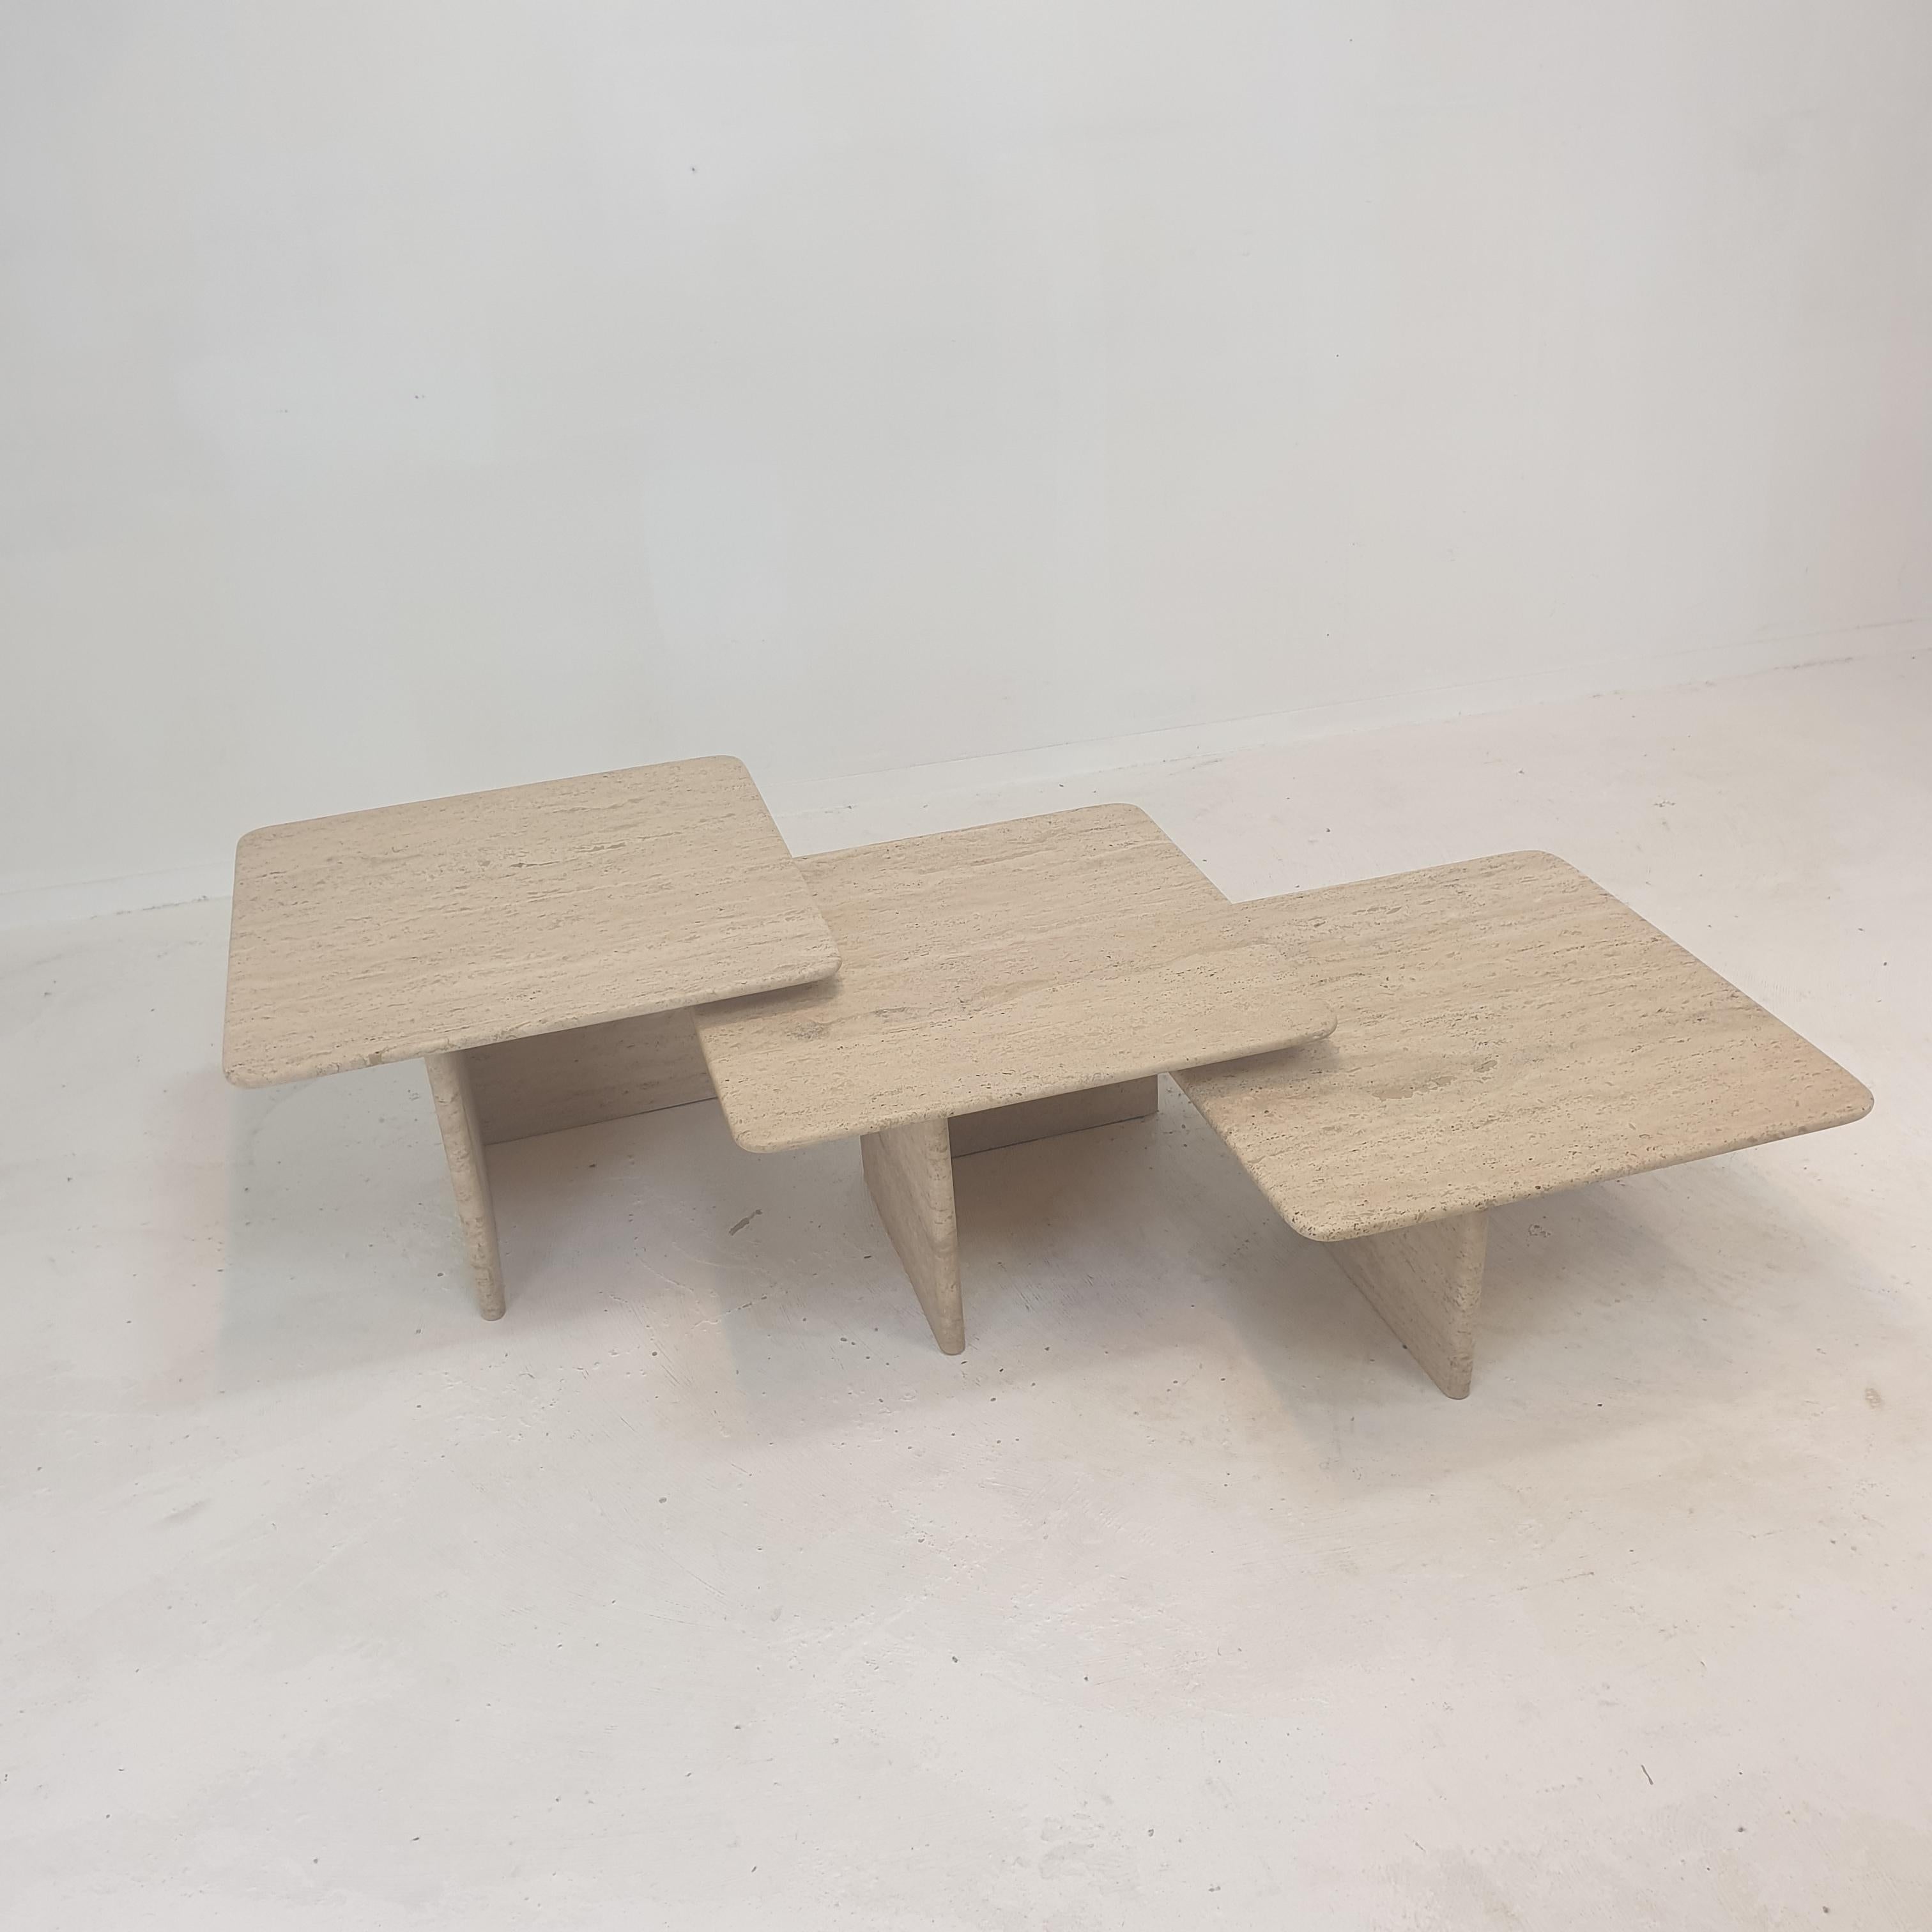 Set of 3 Italian Travertine Nesting or Coffee Tables, 1980s For Sale 5